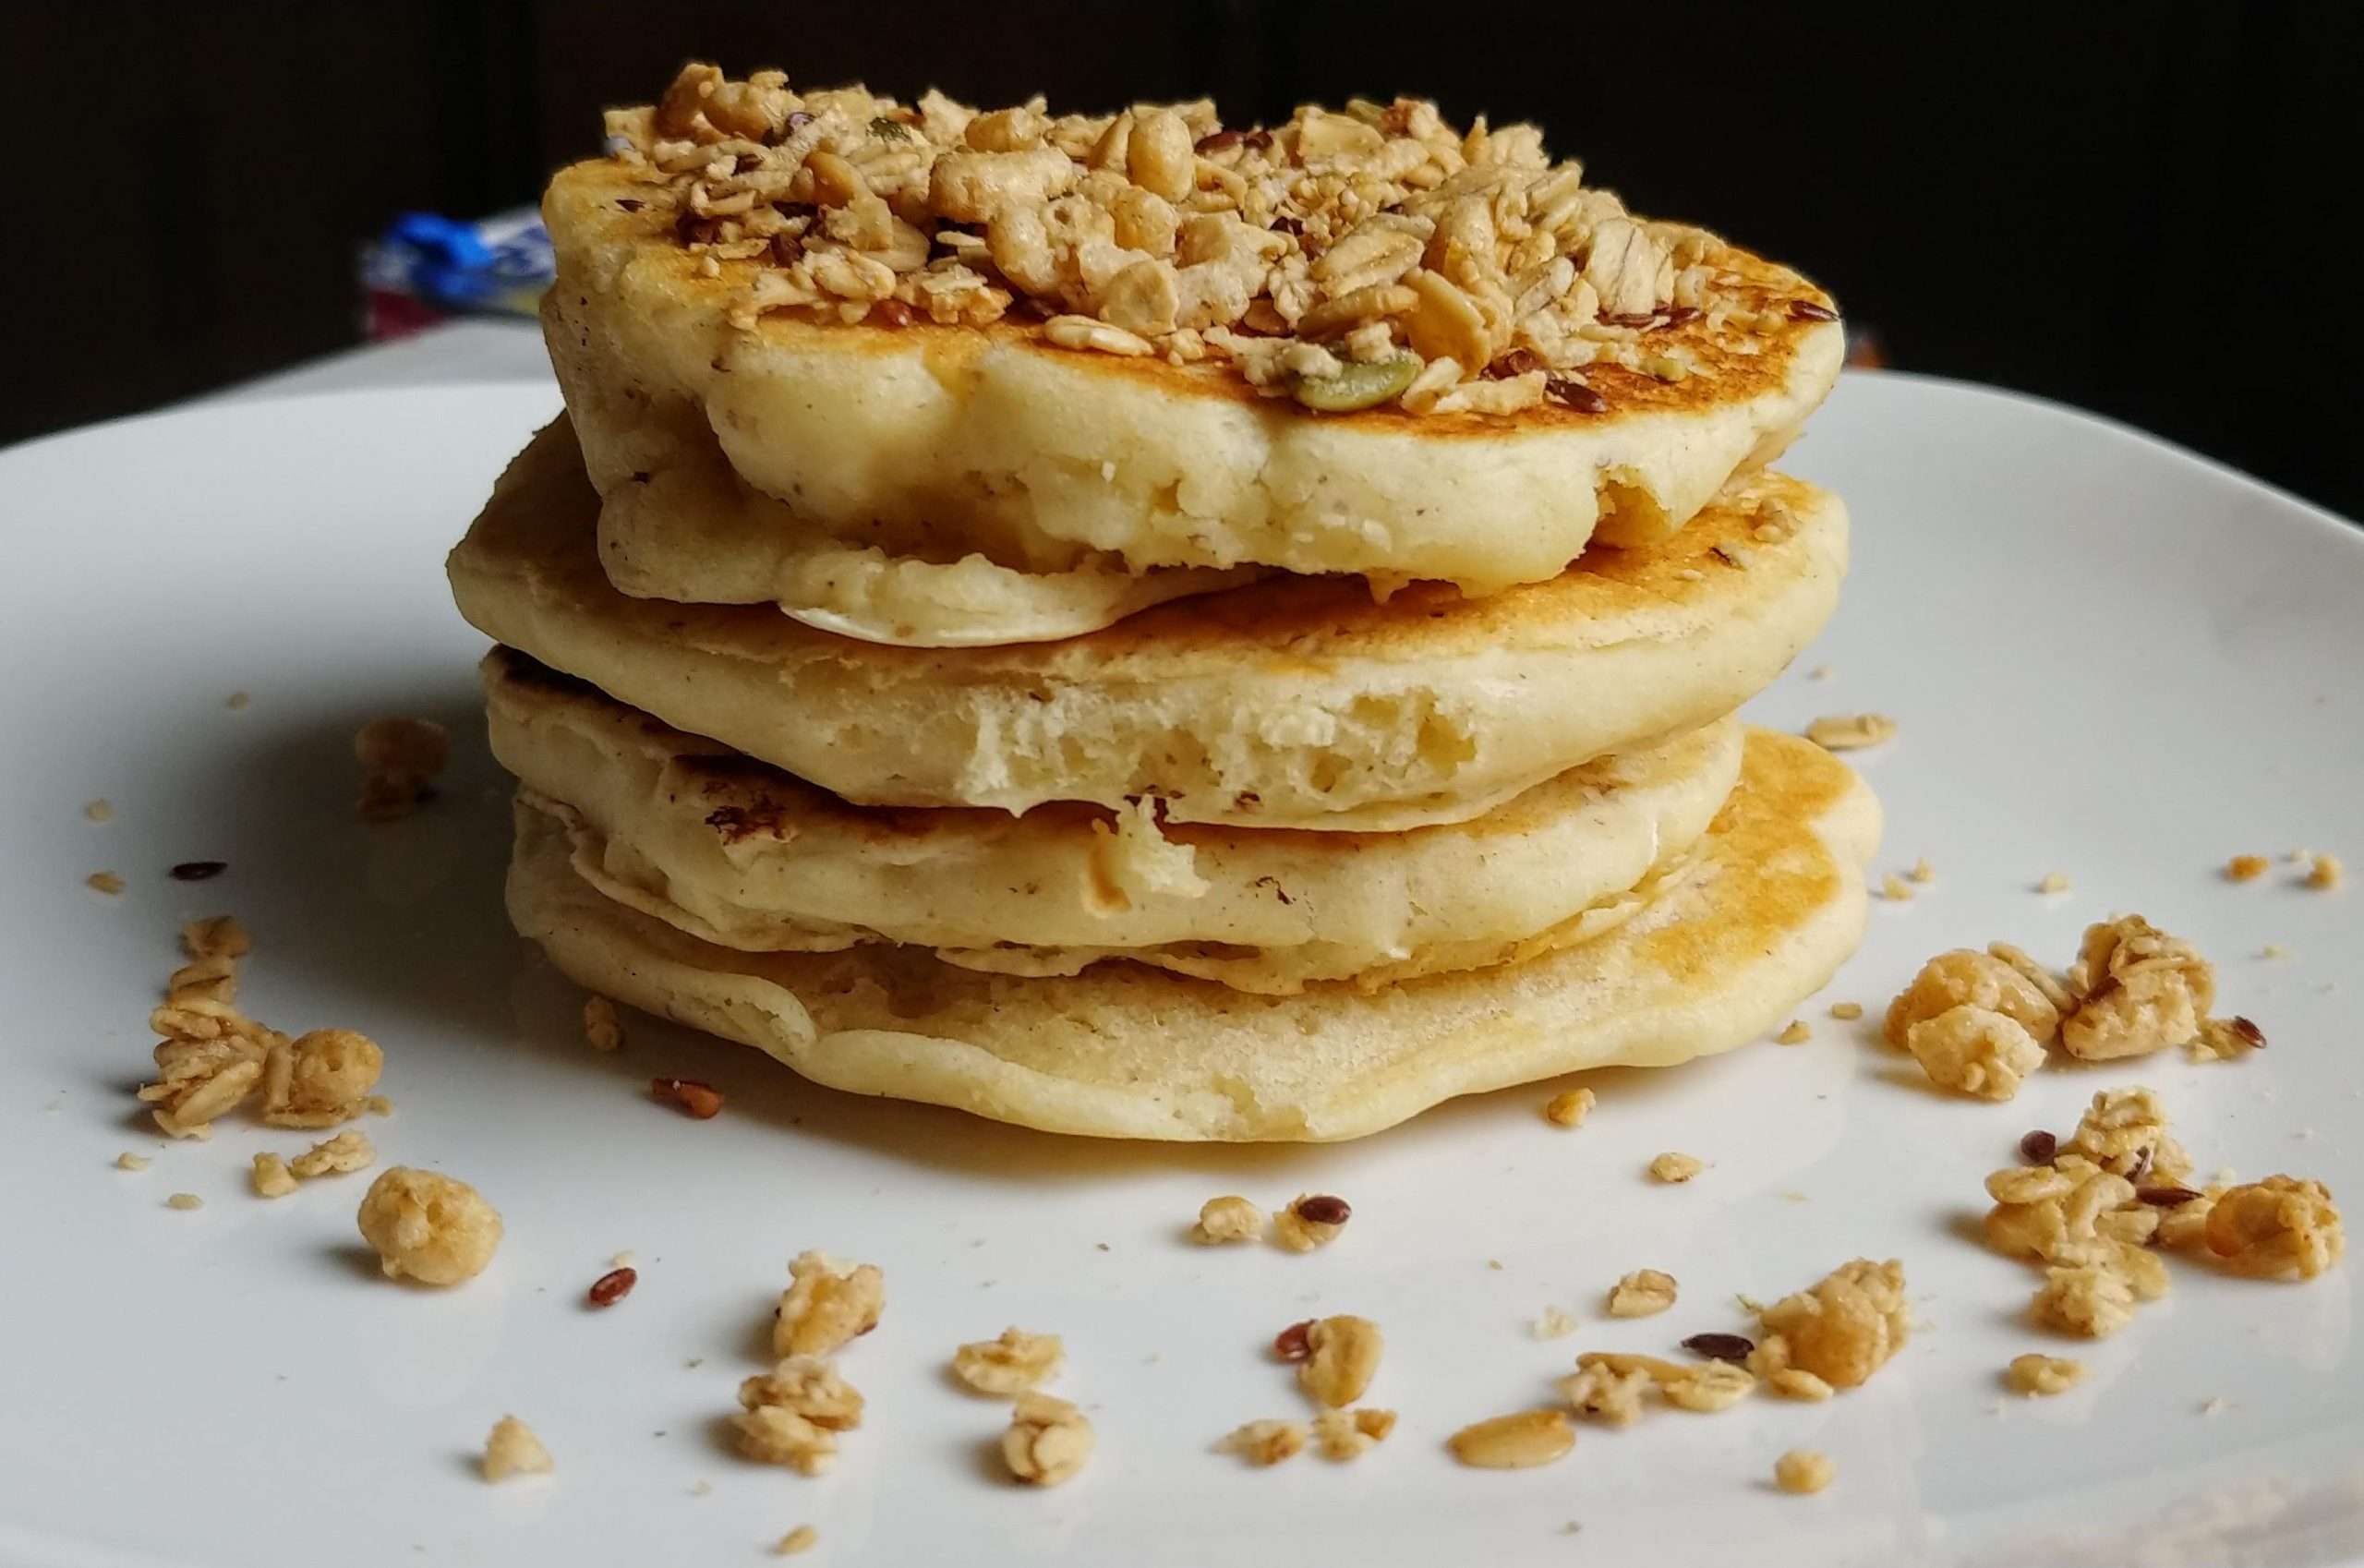 Fluffy Pancakes made with homemade Oat milk! : veganrecipes